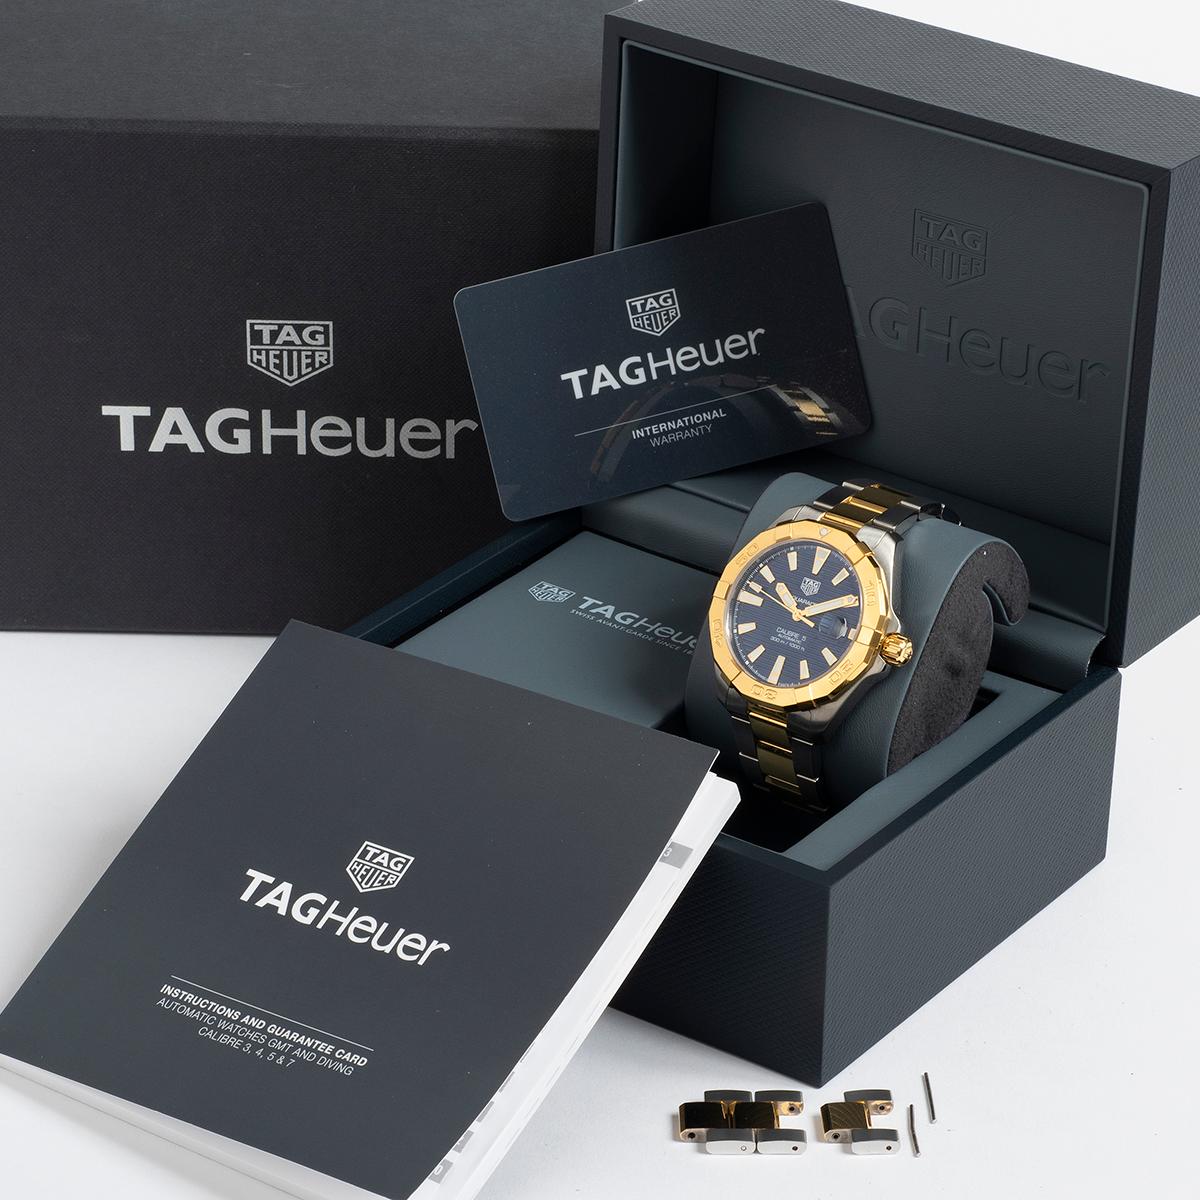 Our Tag Heuer Aquaracer reference WBD2120-0 with 41mm gold/steel case and bracelet and blue dial with automatic movement , is presented in outstanding condition with little signs of use from new. A complete set with inner and outer box and